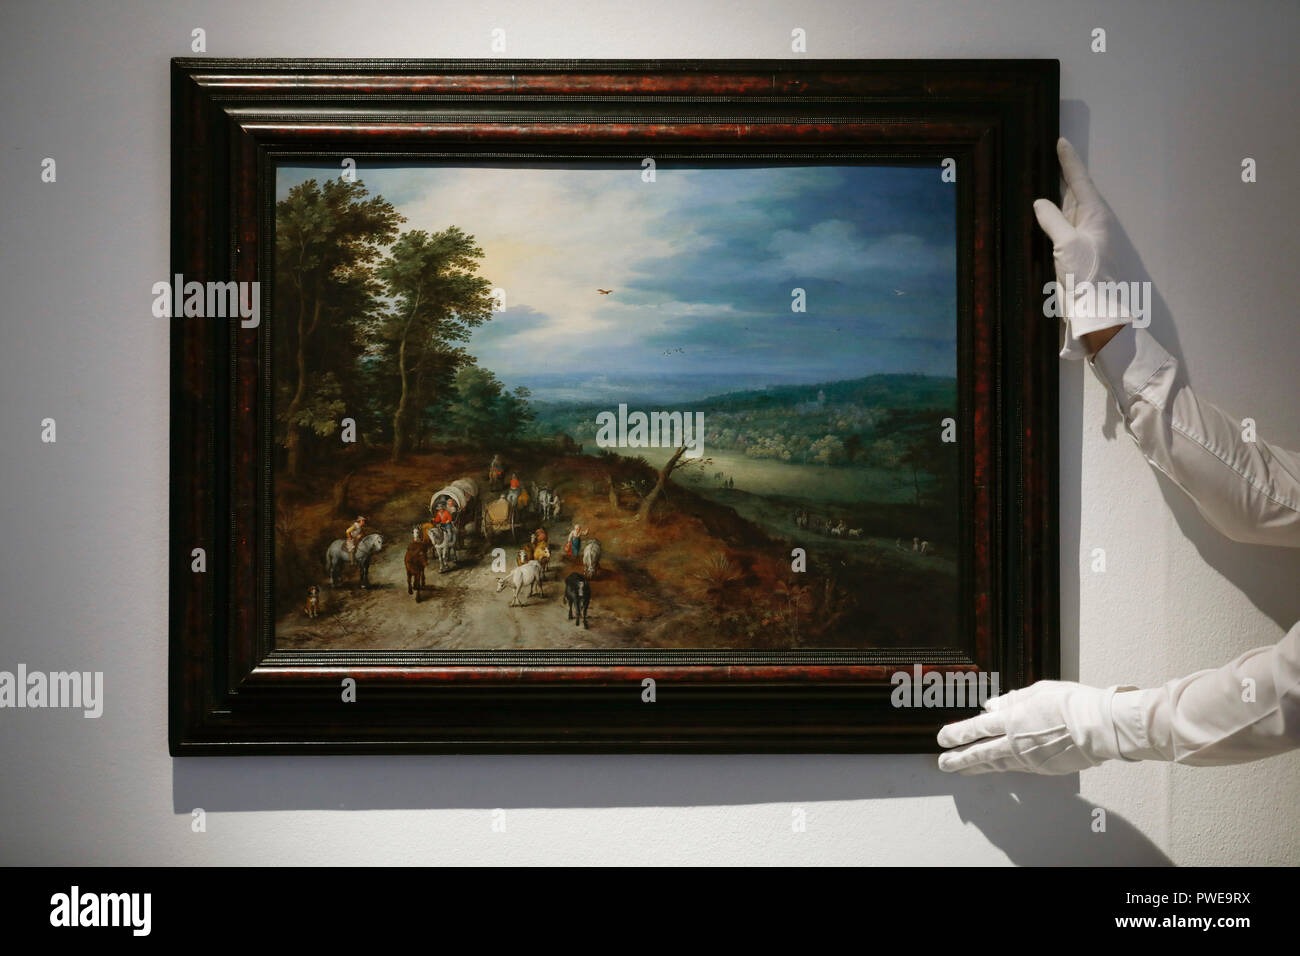 London, UK, 16th Oct 2018. A Christie's employee holds Dutch master Jan Breughel the Elder 's works 'An extensive wooded landscapef' at Christie's AuctionHouse in London, UK, Tuesday October 16, 2017. The piece is expected to achieve up to £5million when it comes to auction as part of the Albada Jelgersma Collection sale during Christie's Classic Week in December. Photograph : Credit: Luke MacGregor/Alamy Live News Stock Photo